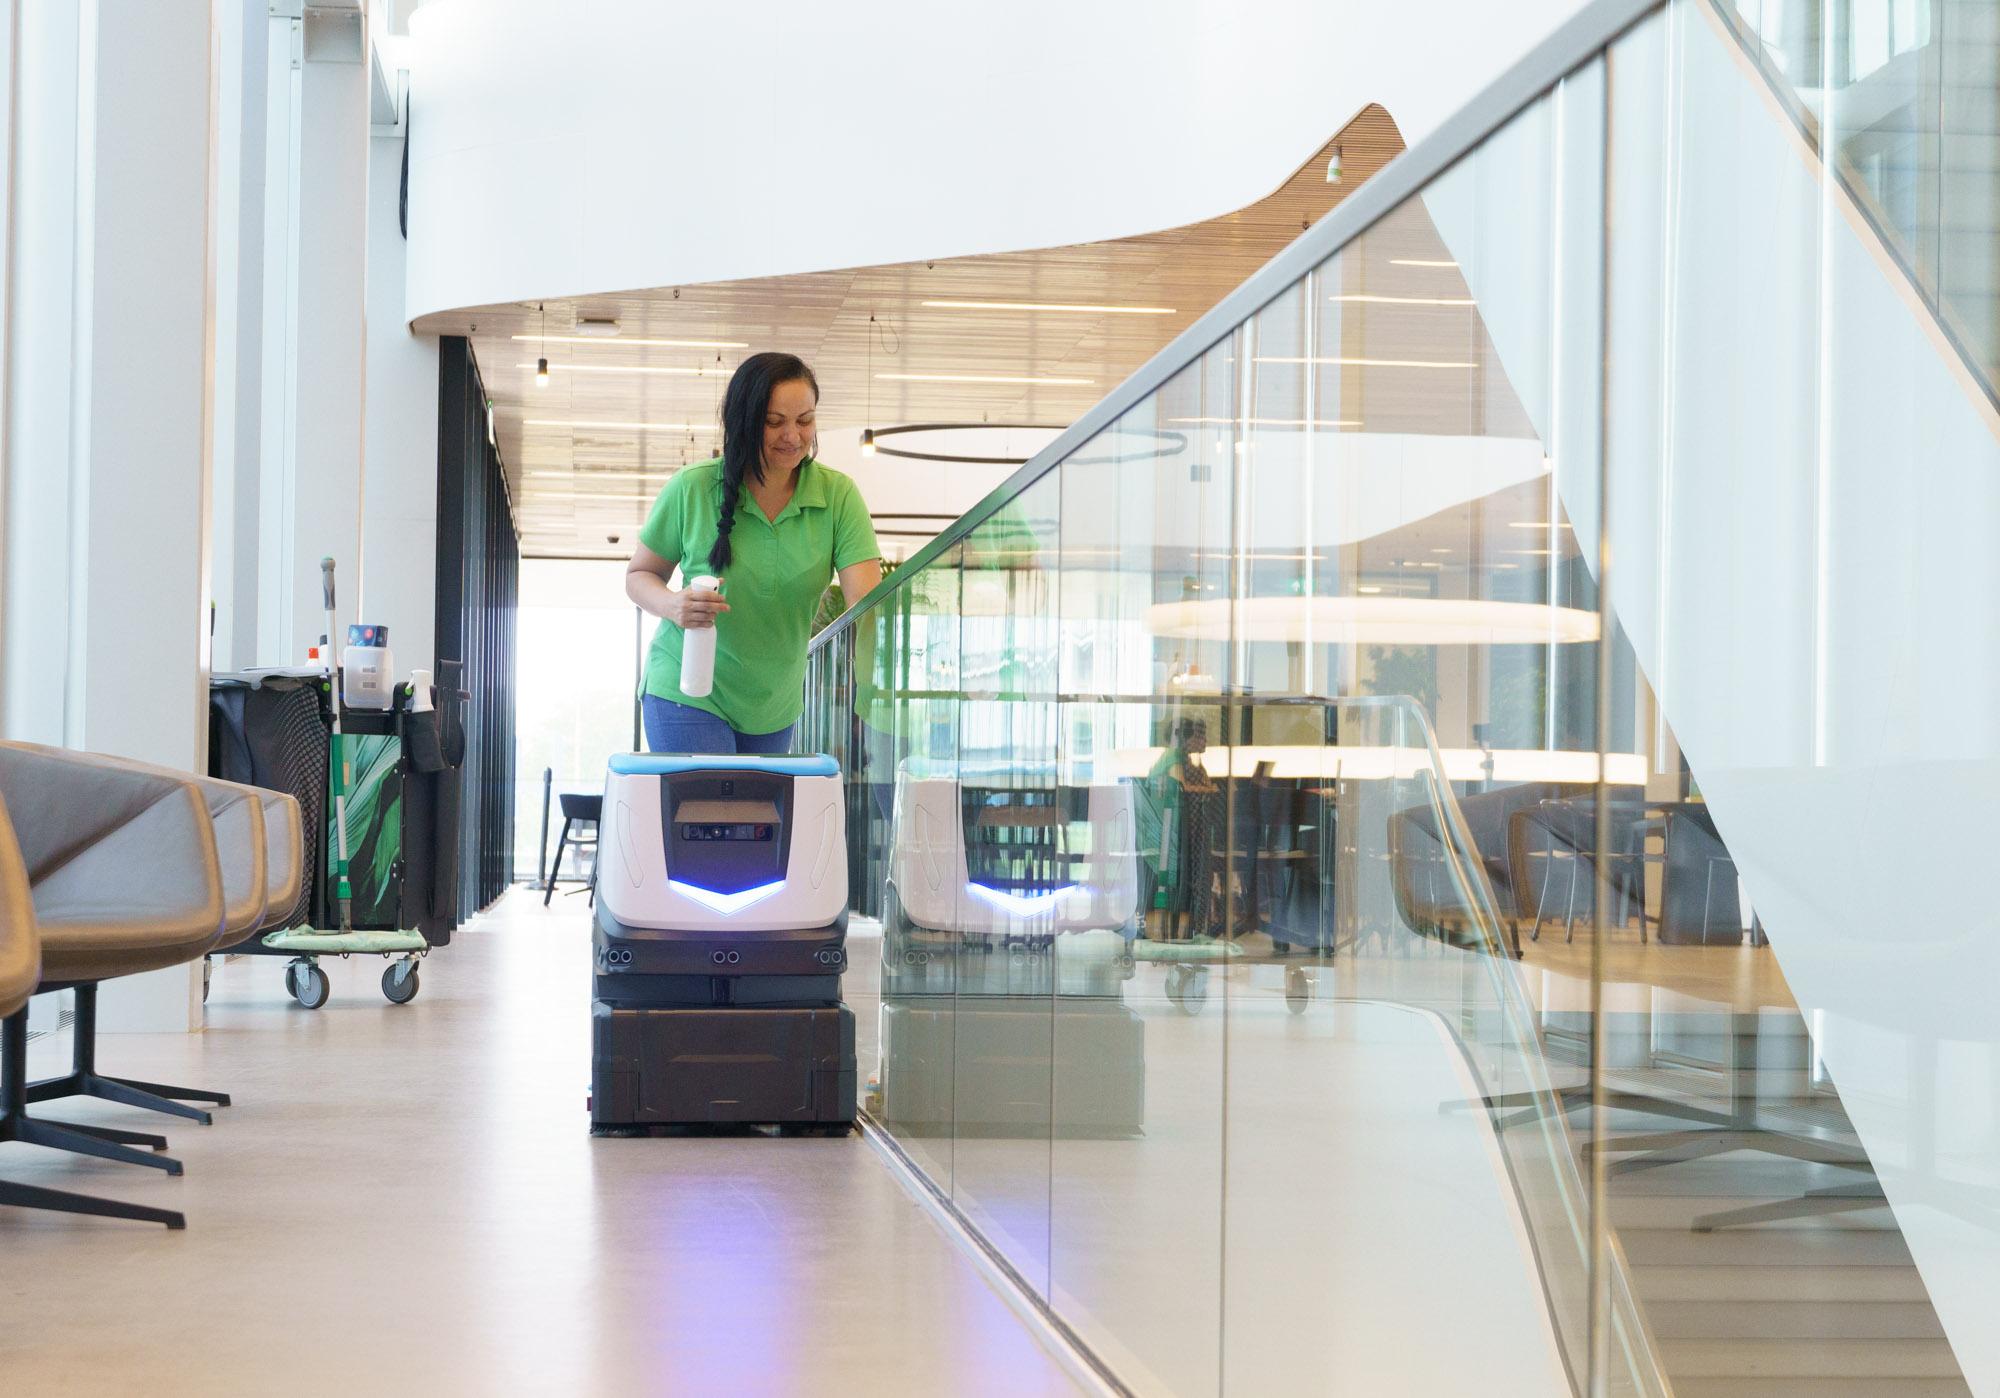 ICE Cobotics Cobi 18, robotic floor scrubber, cleans commercial office building next to cleaning staff member wiping down surfaces